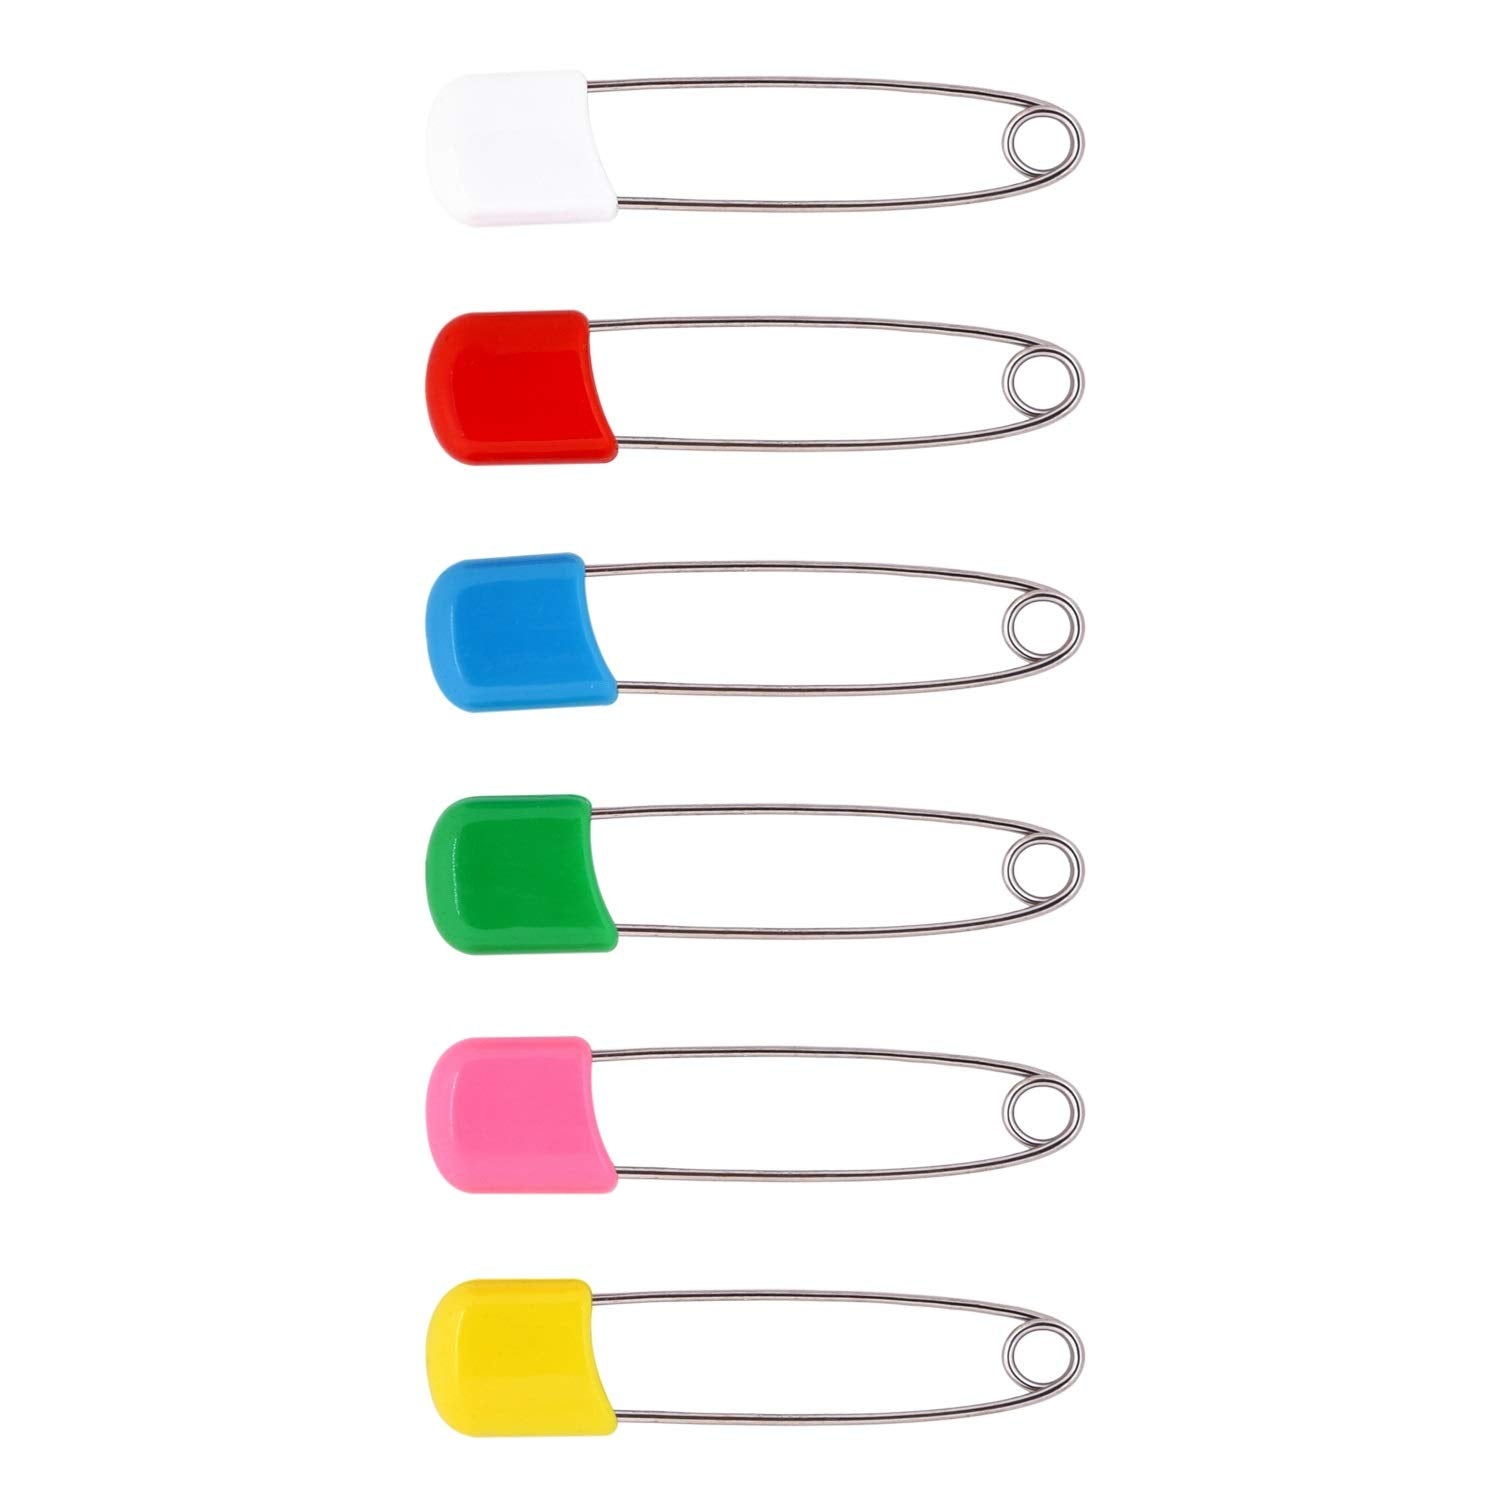 Hopop Safety Pins for Babies, 0m+